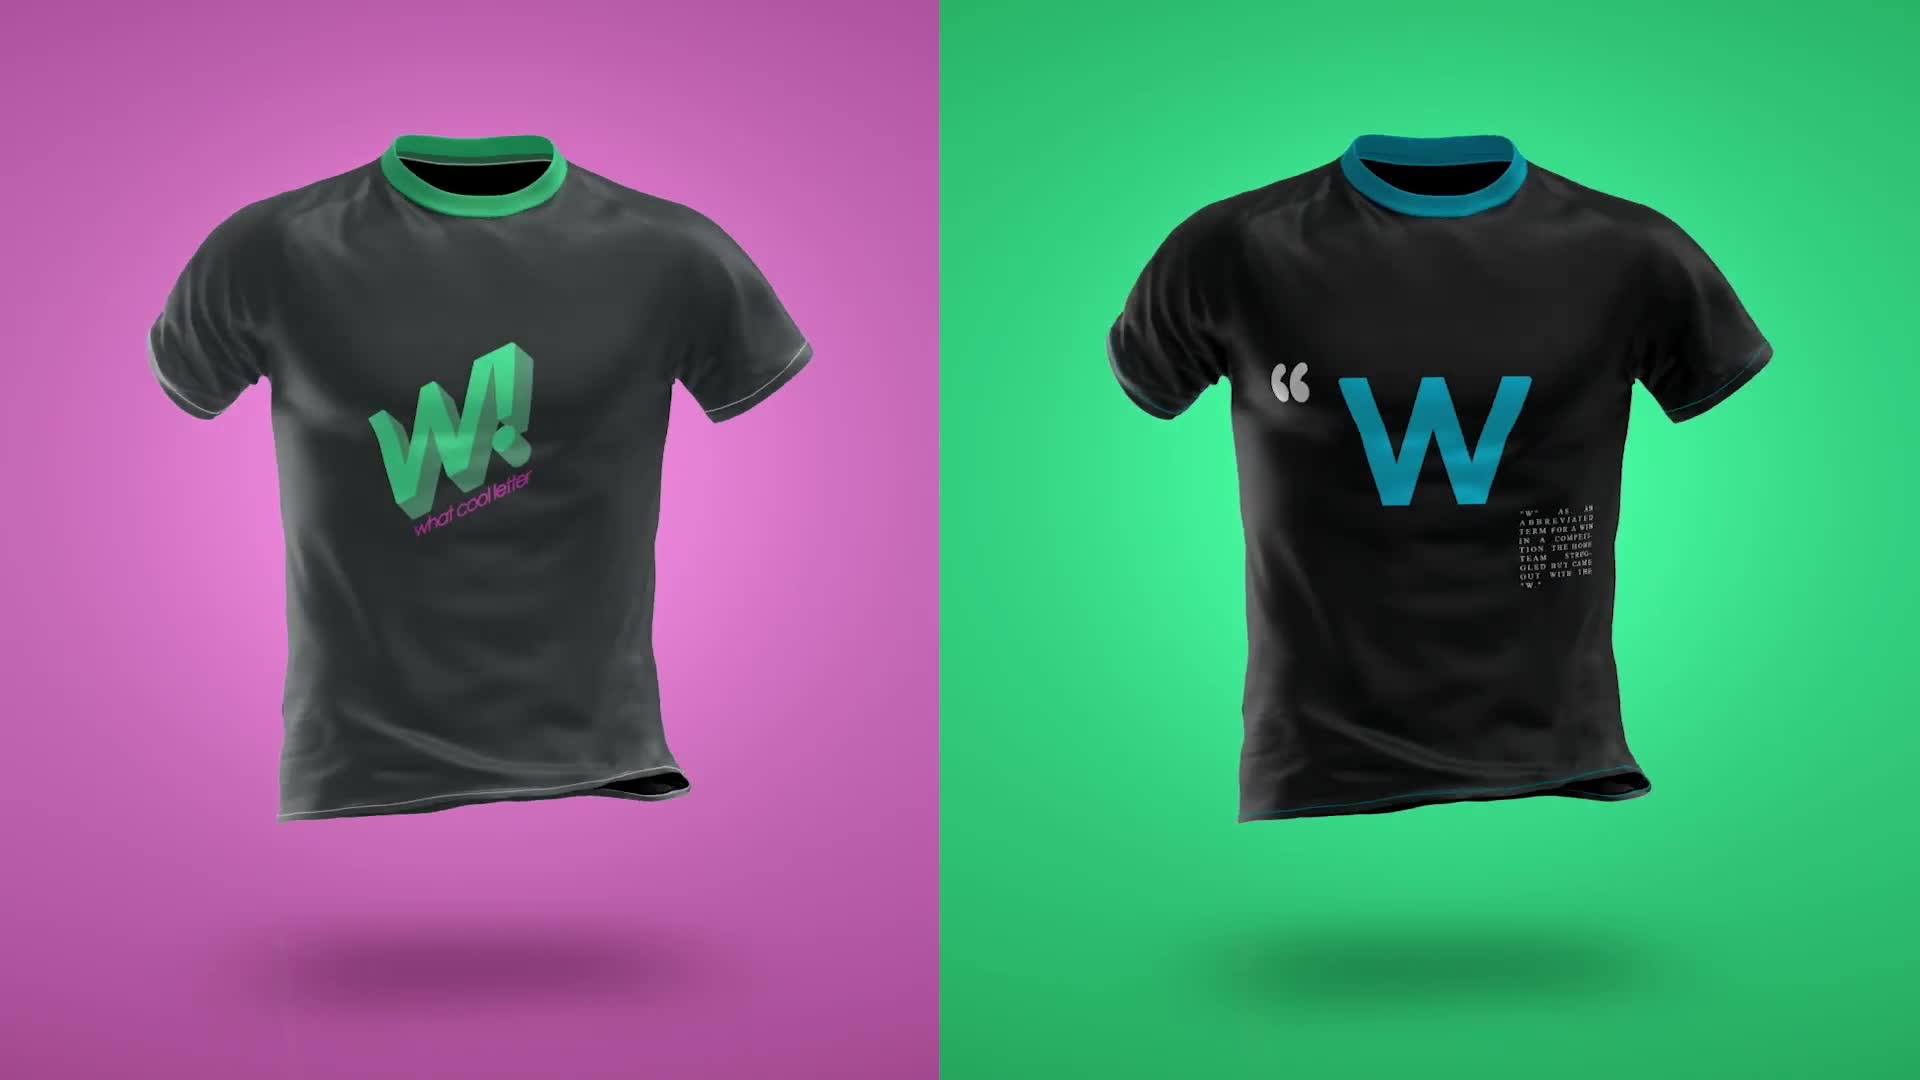 Download Animated Mockup PRO: 360 Animated T shirt Mockup Template Videohive 30892735 Download Quick ...